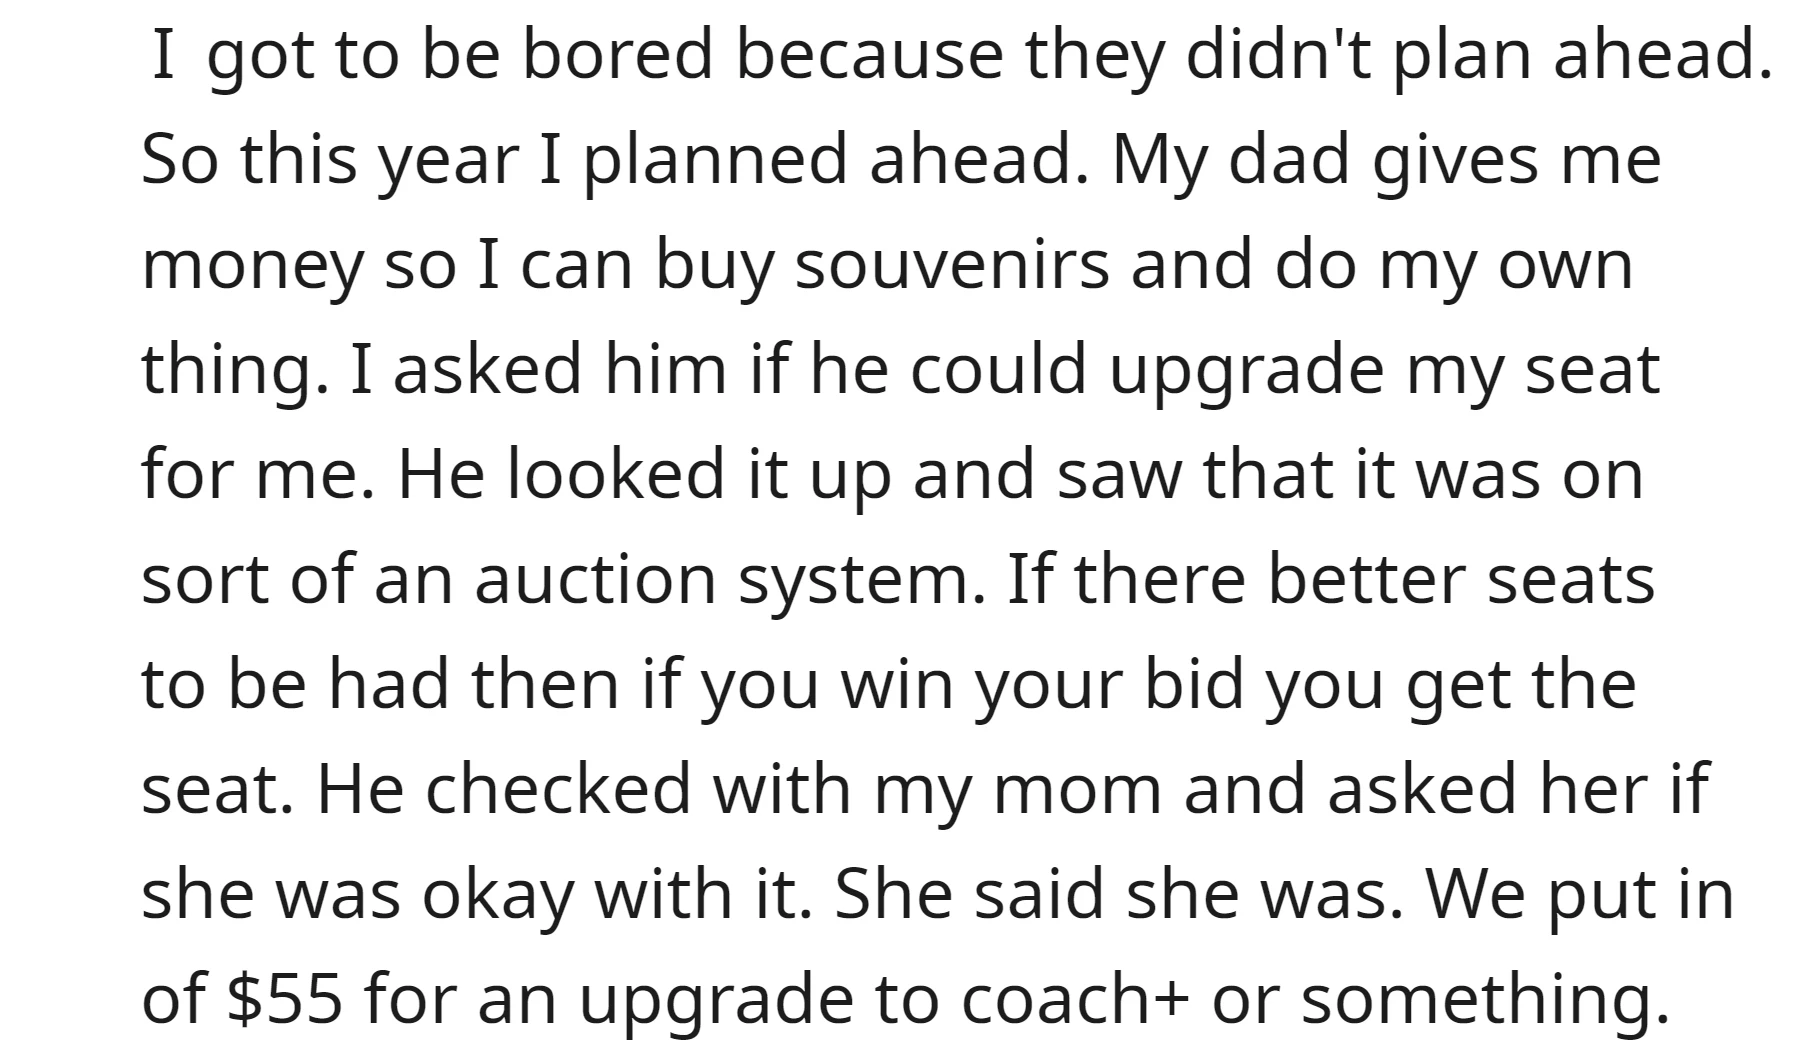 OP asked his dad if he could help him upgrade his seat